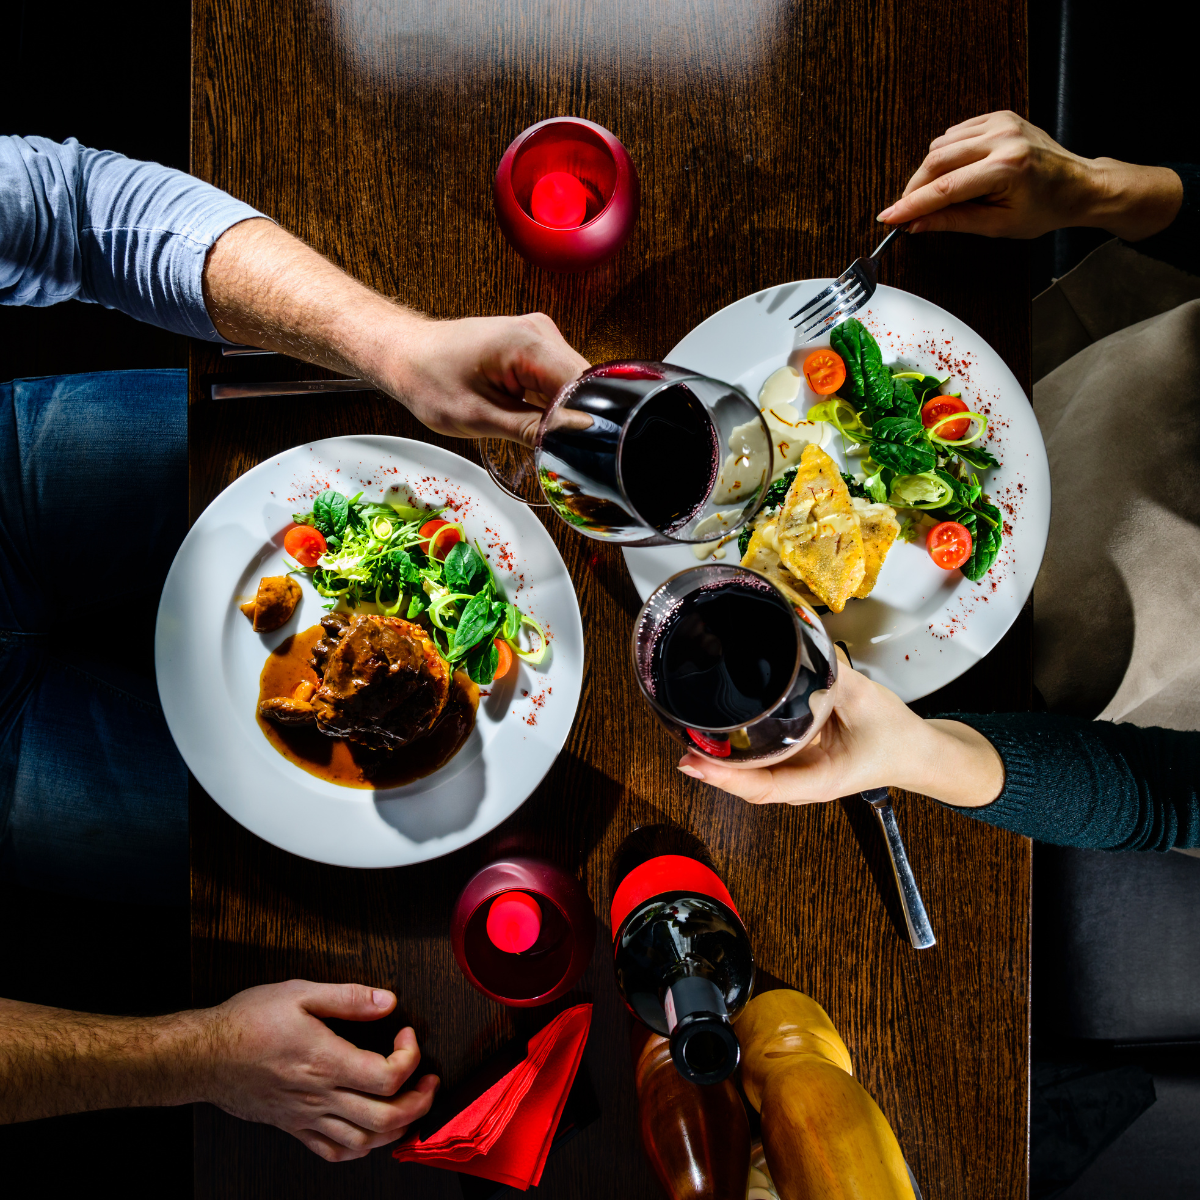 40. Recreate Your First Date Meal: The Ultimate Anniversary Gift Idea for Him